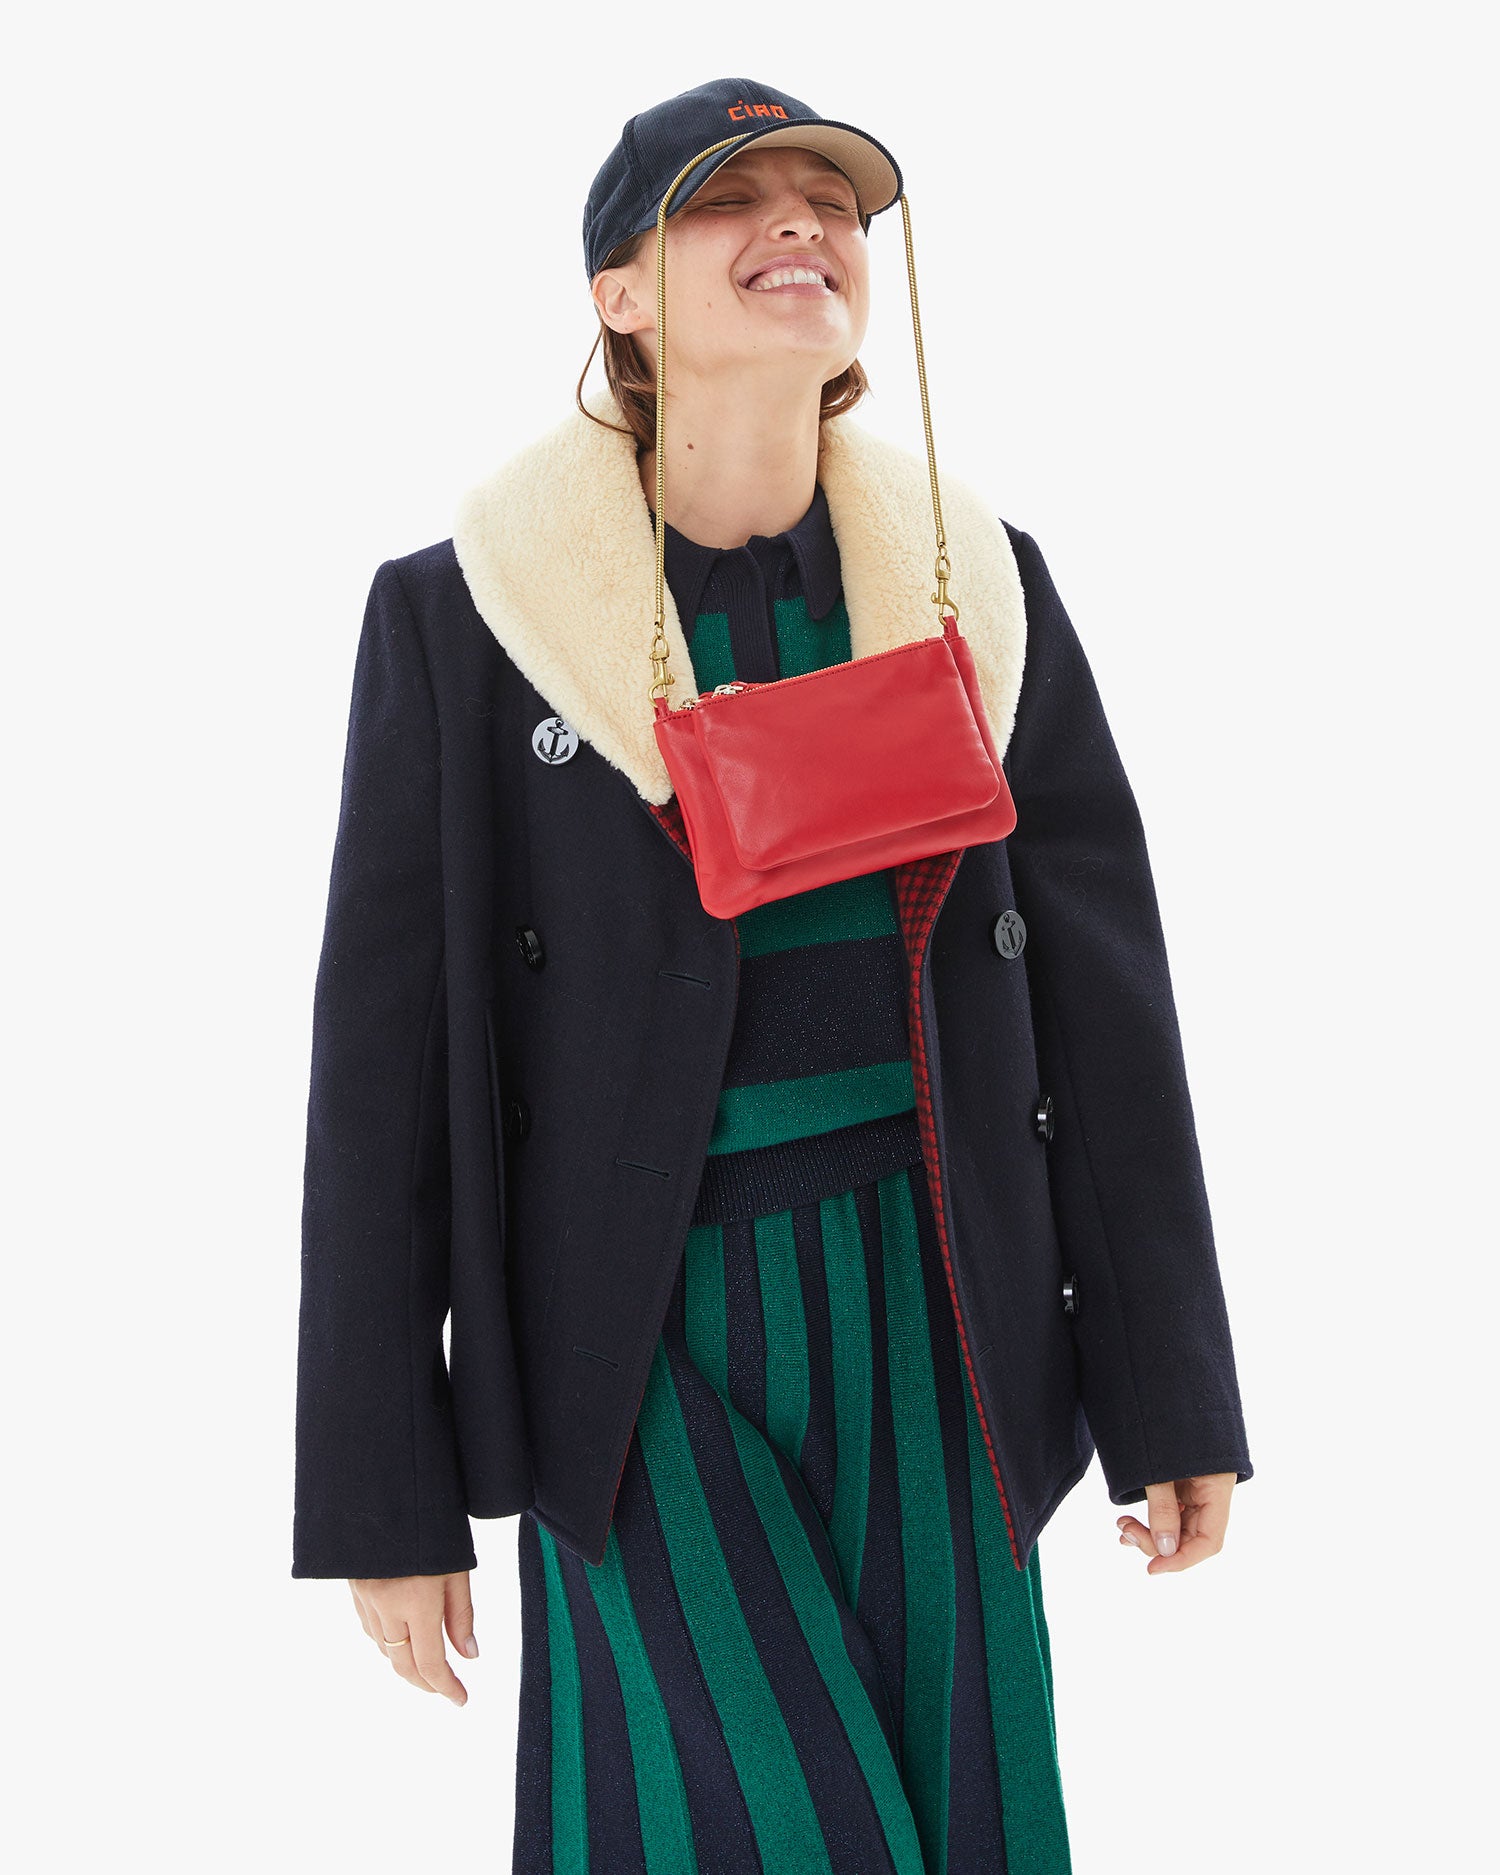 Rouge Wallet Clutch Plus with the Vintage Gold Snake Chain Shoulder Strap hanging off the brim of her hat